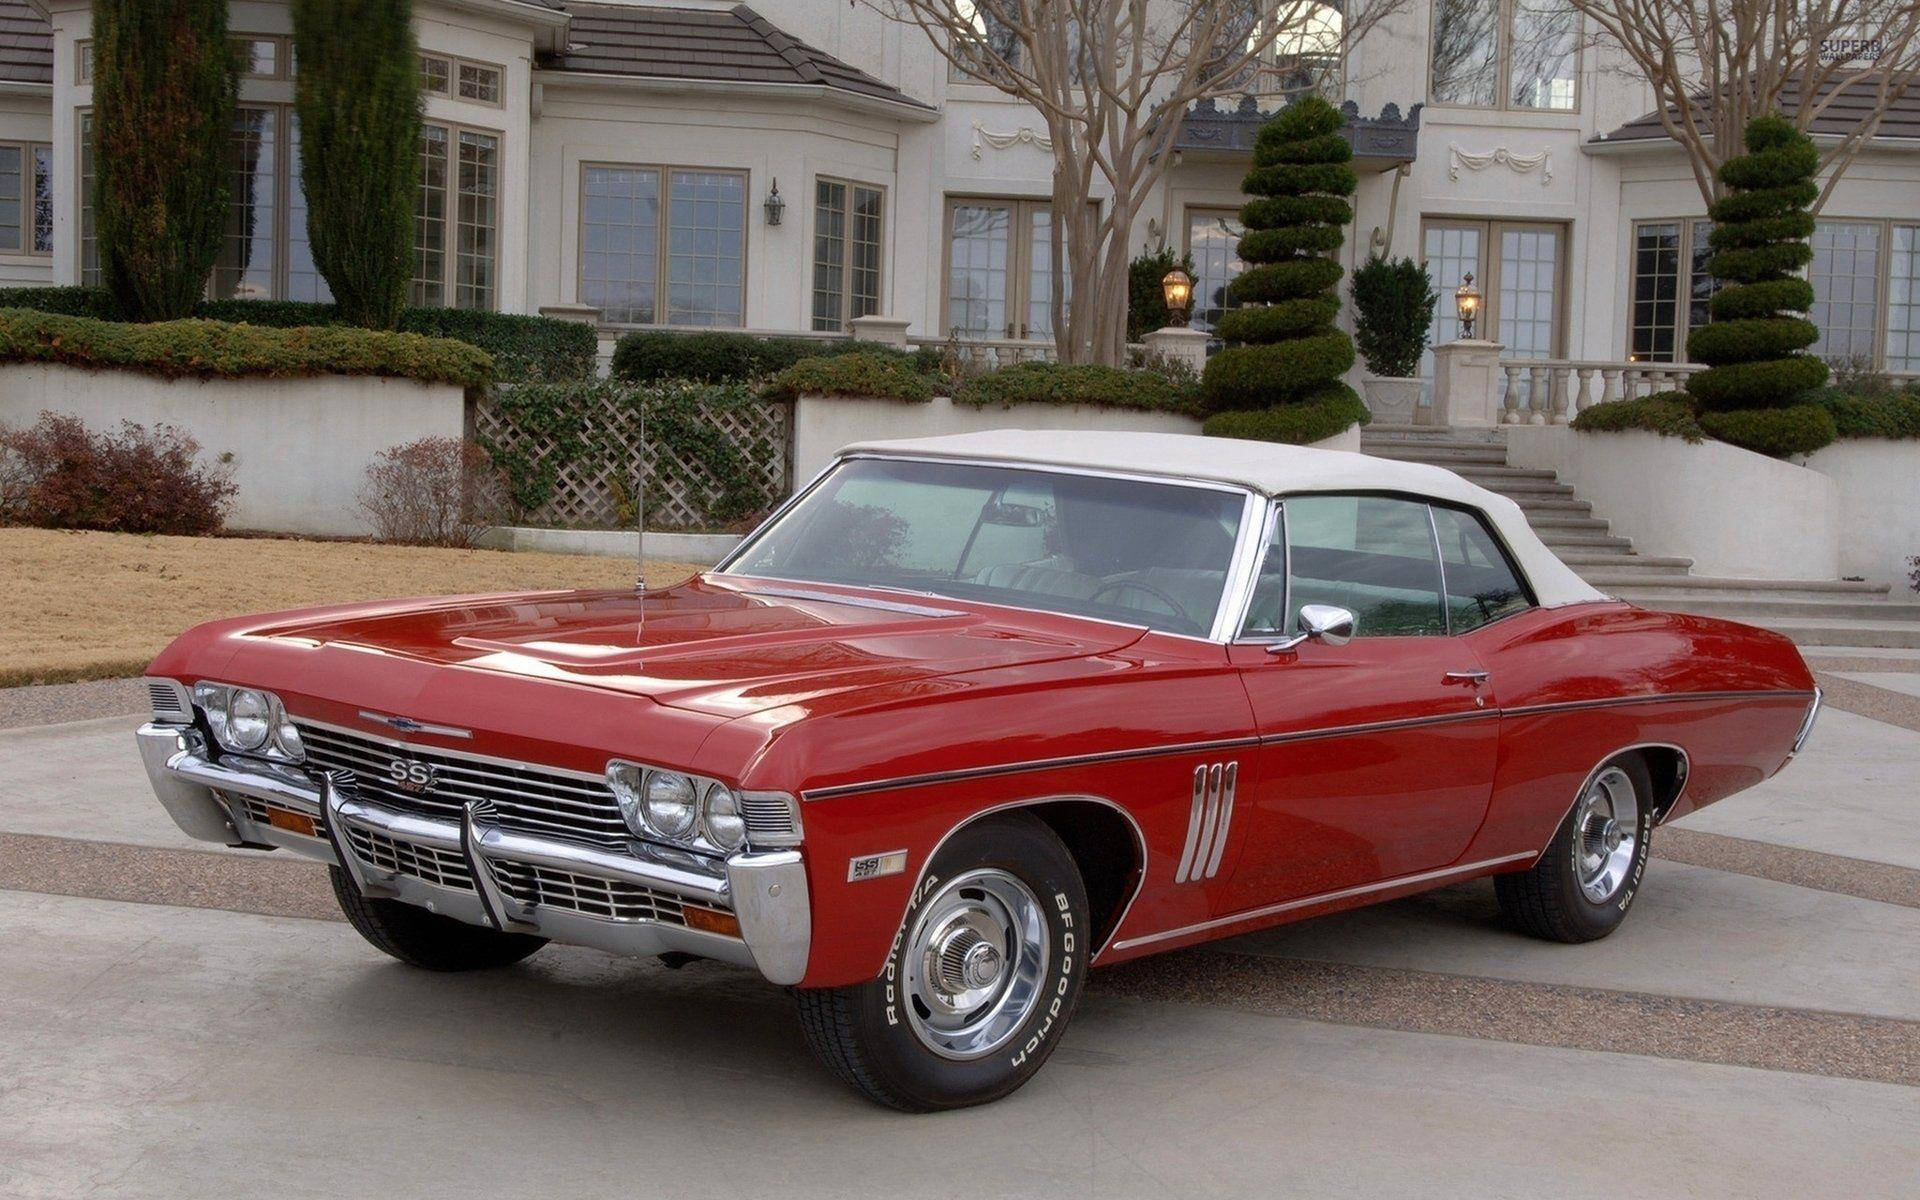 Red Chevrolet Impala 1967 Ss Background